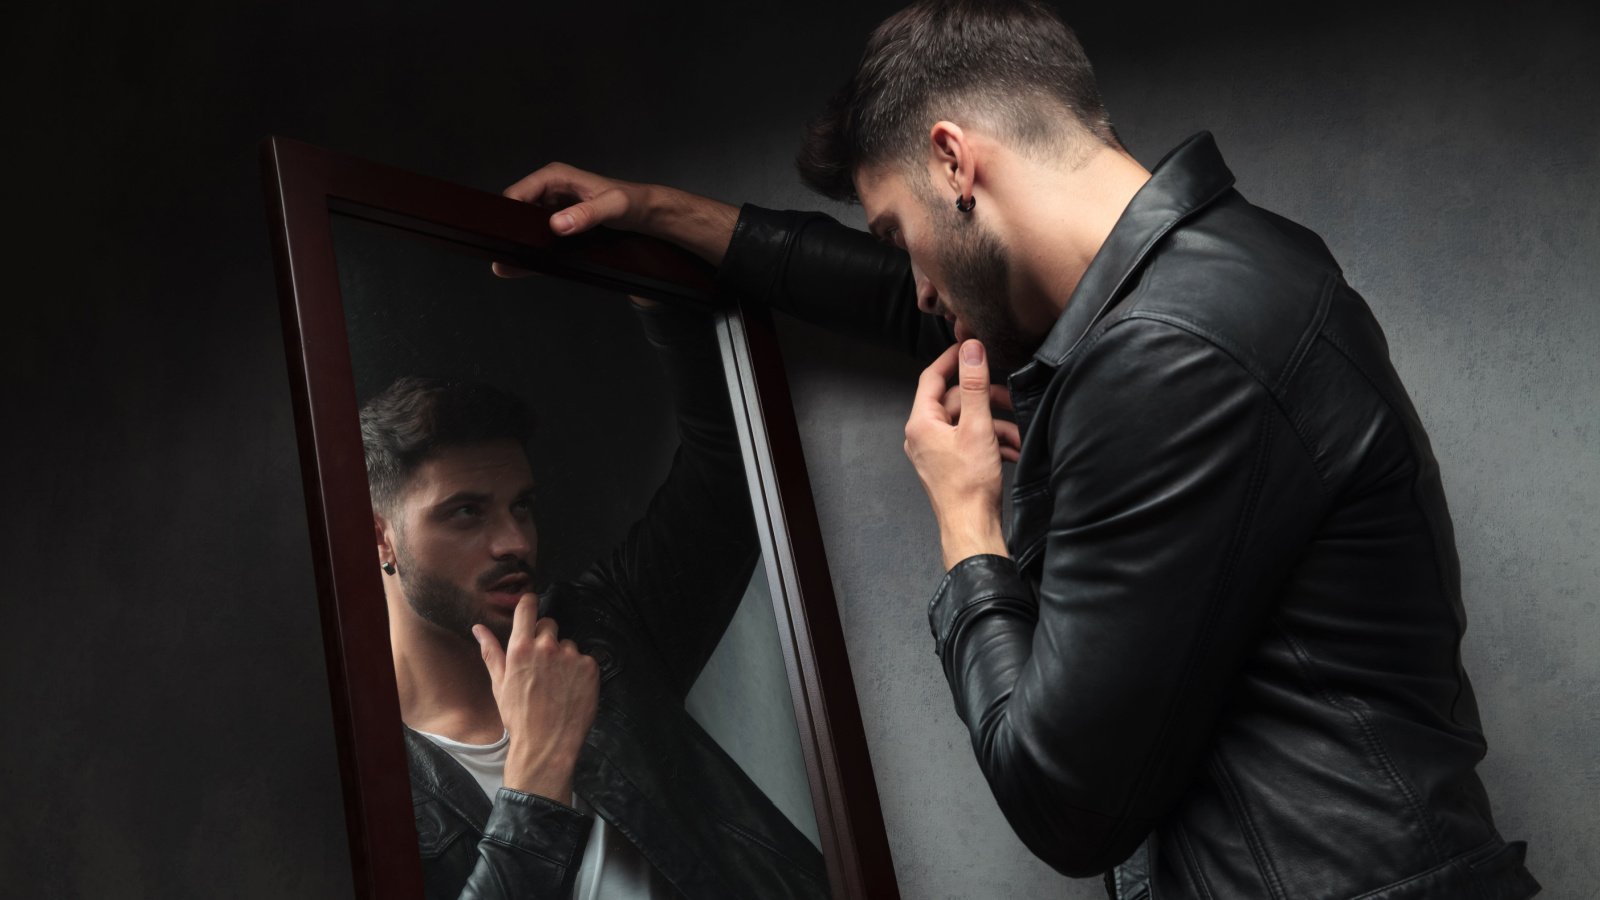 How To Make a Narcissist Miserable: 11 Things They Hate